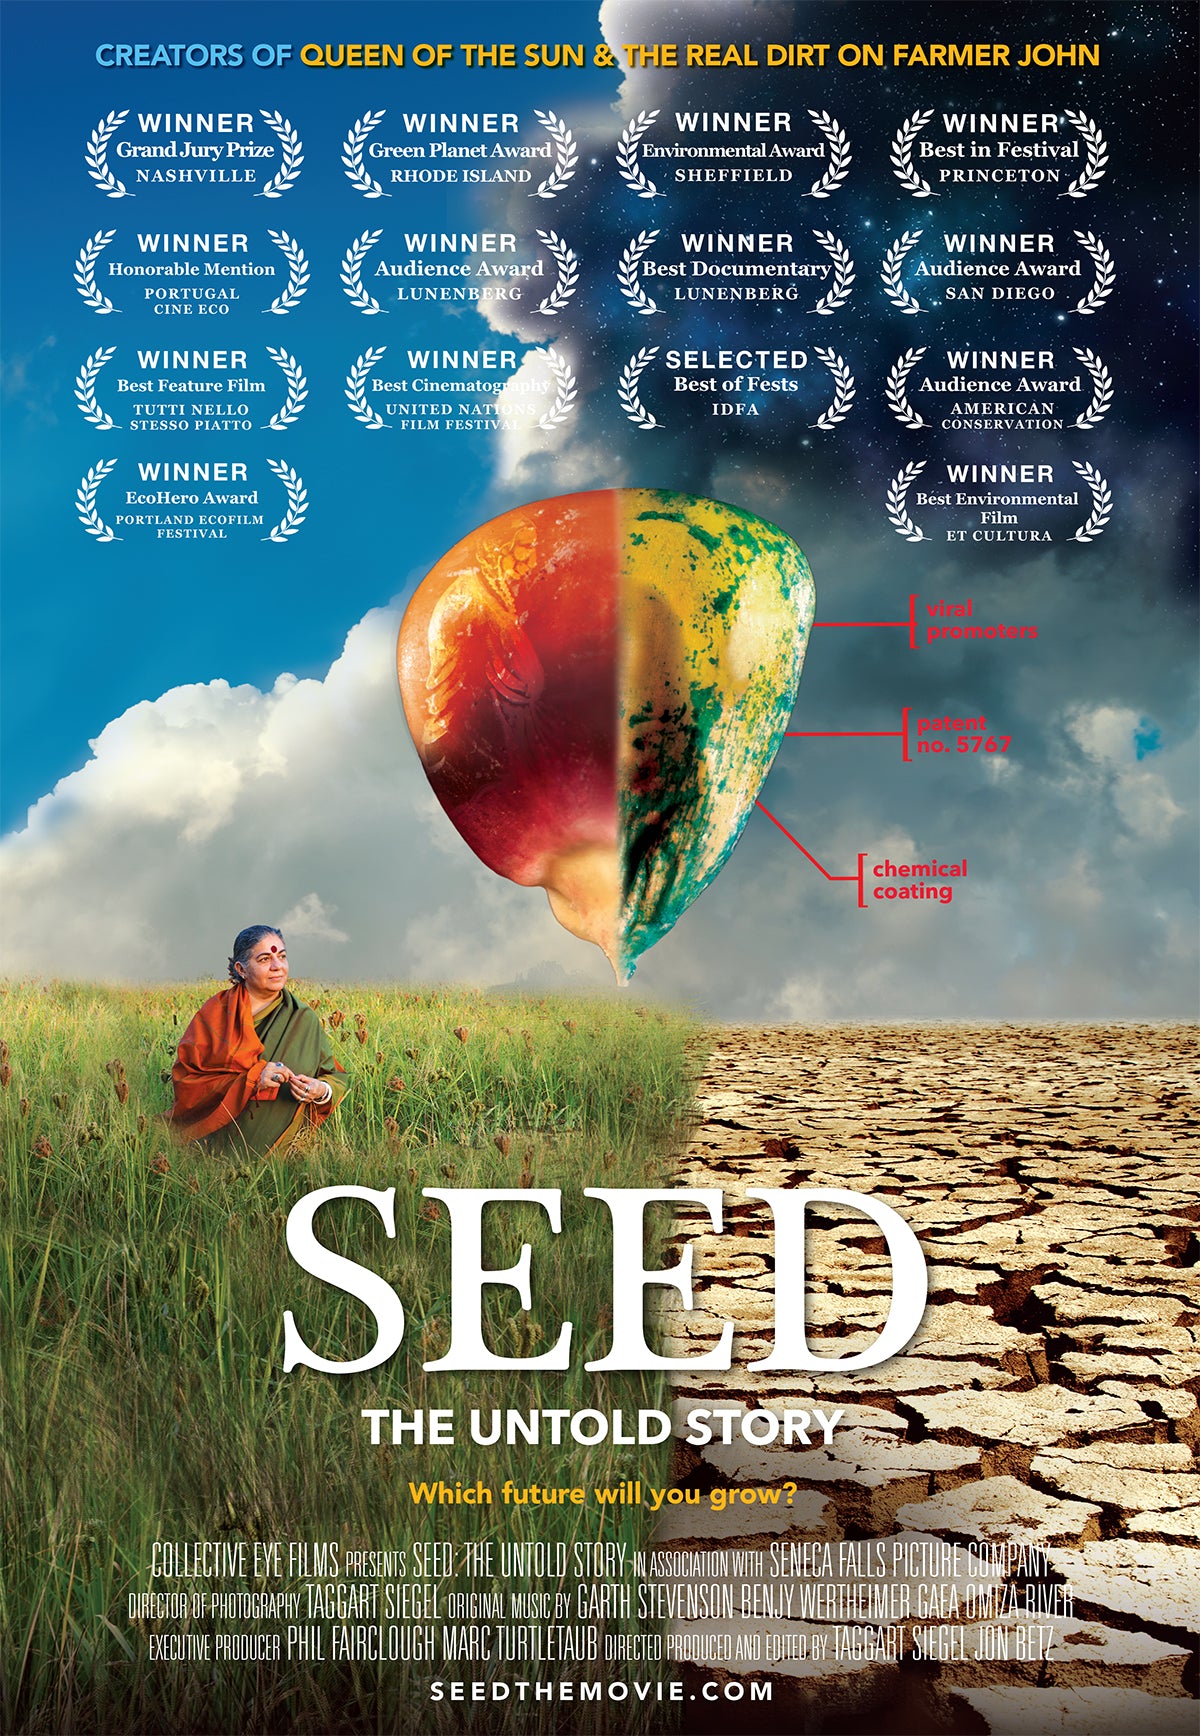 SEED: The Untold Story home-use DVD